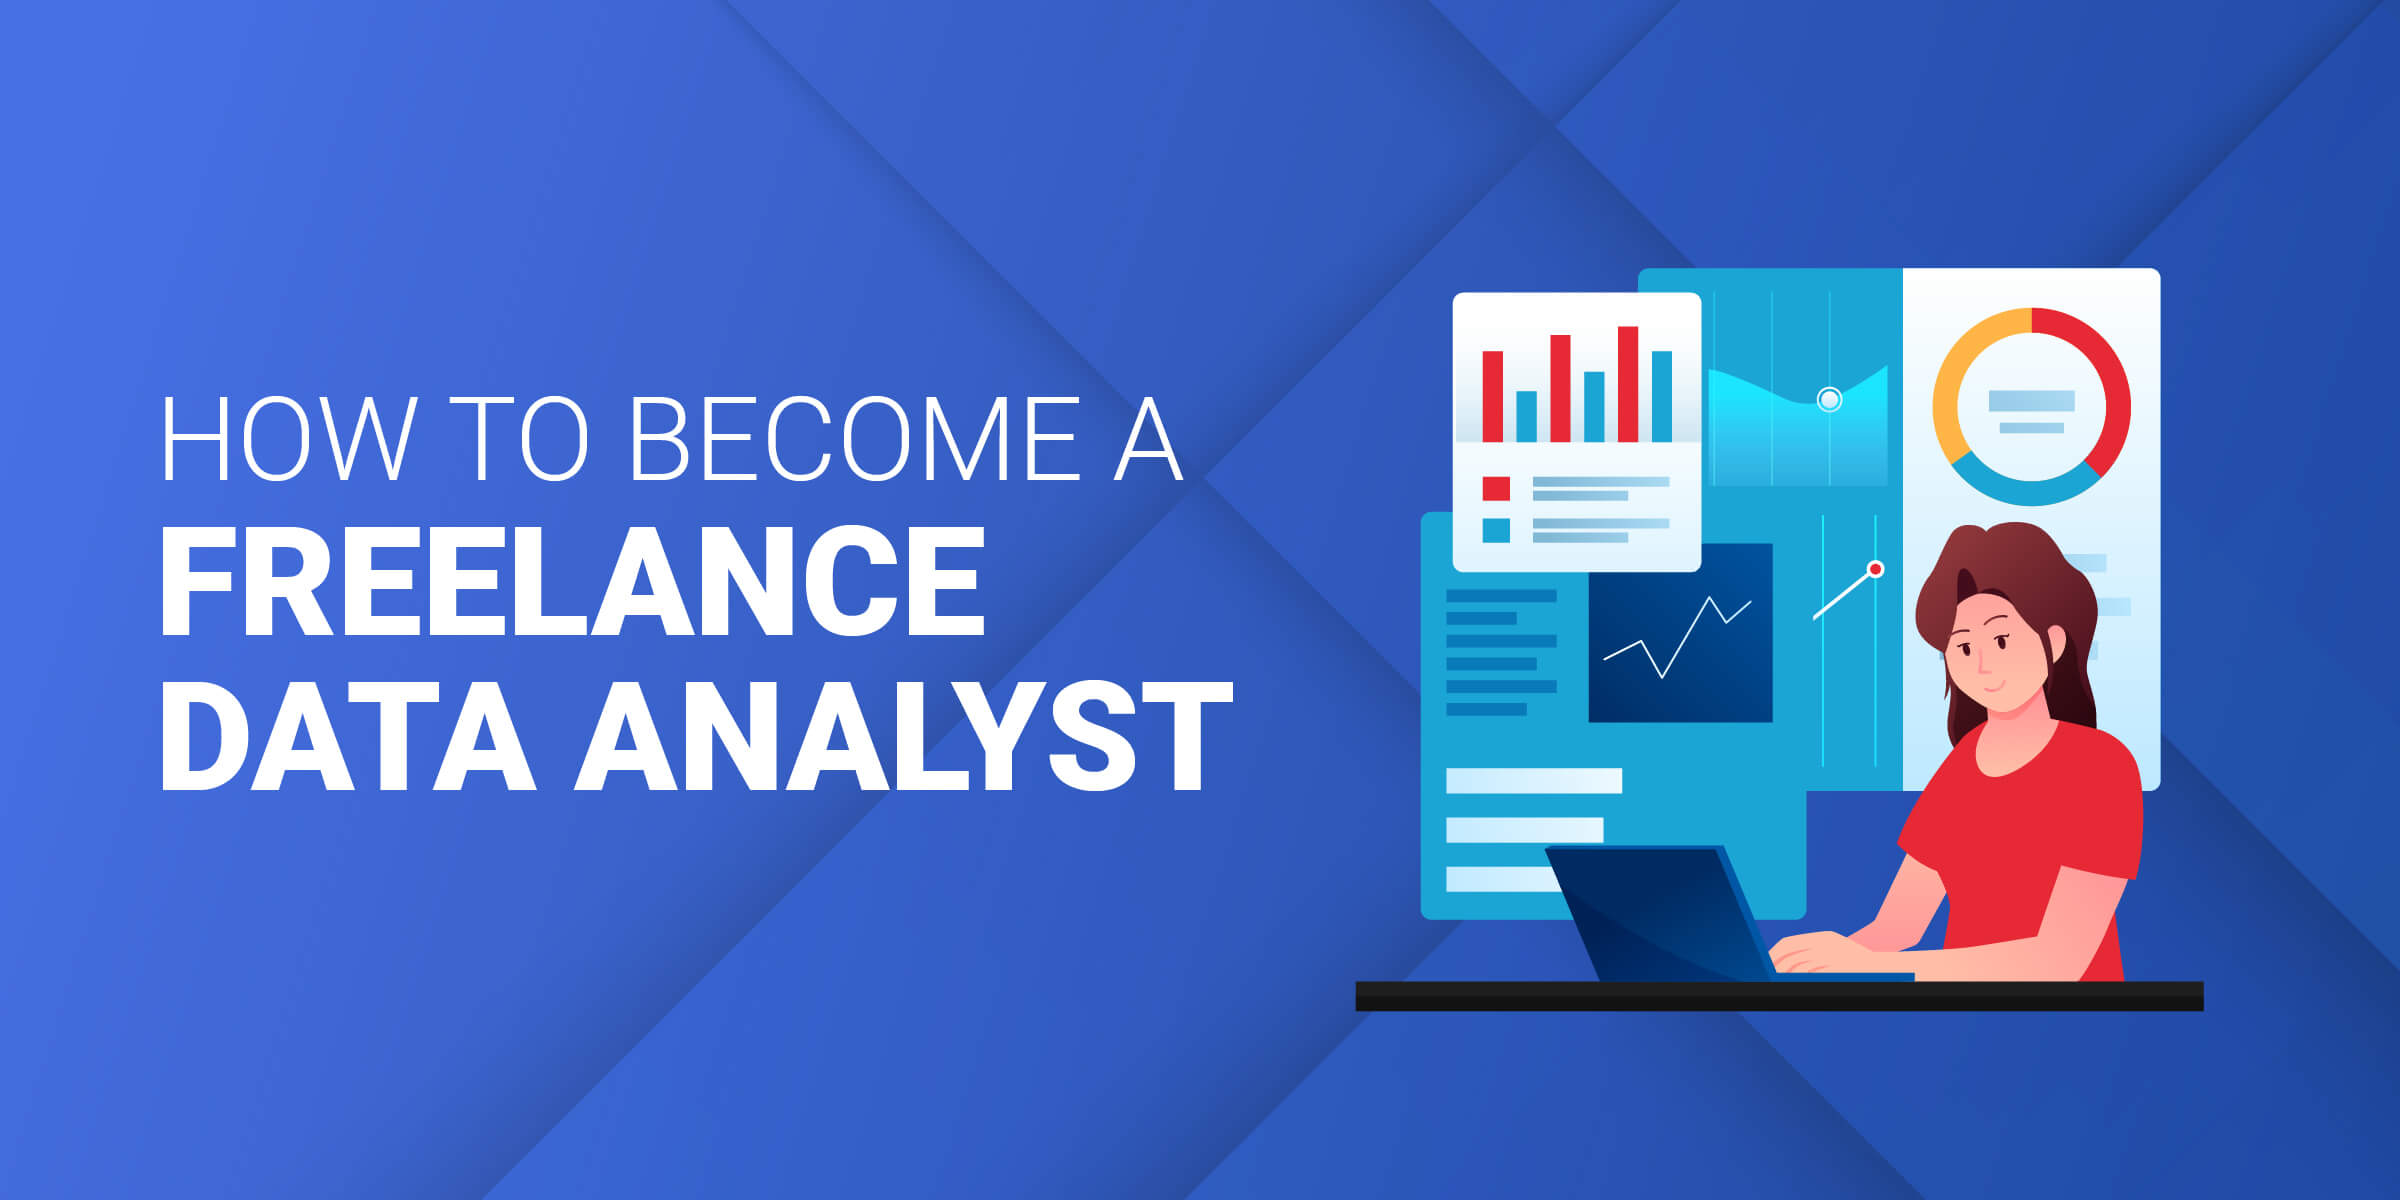 How to Become Freelance Data Analyst